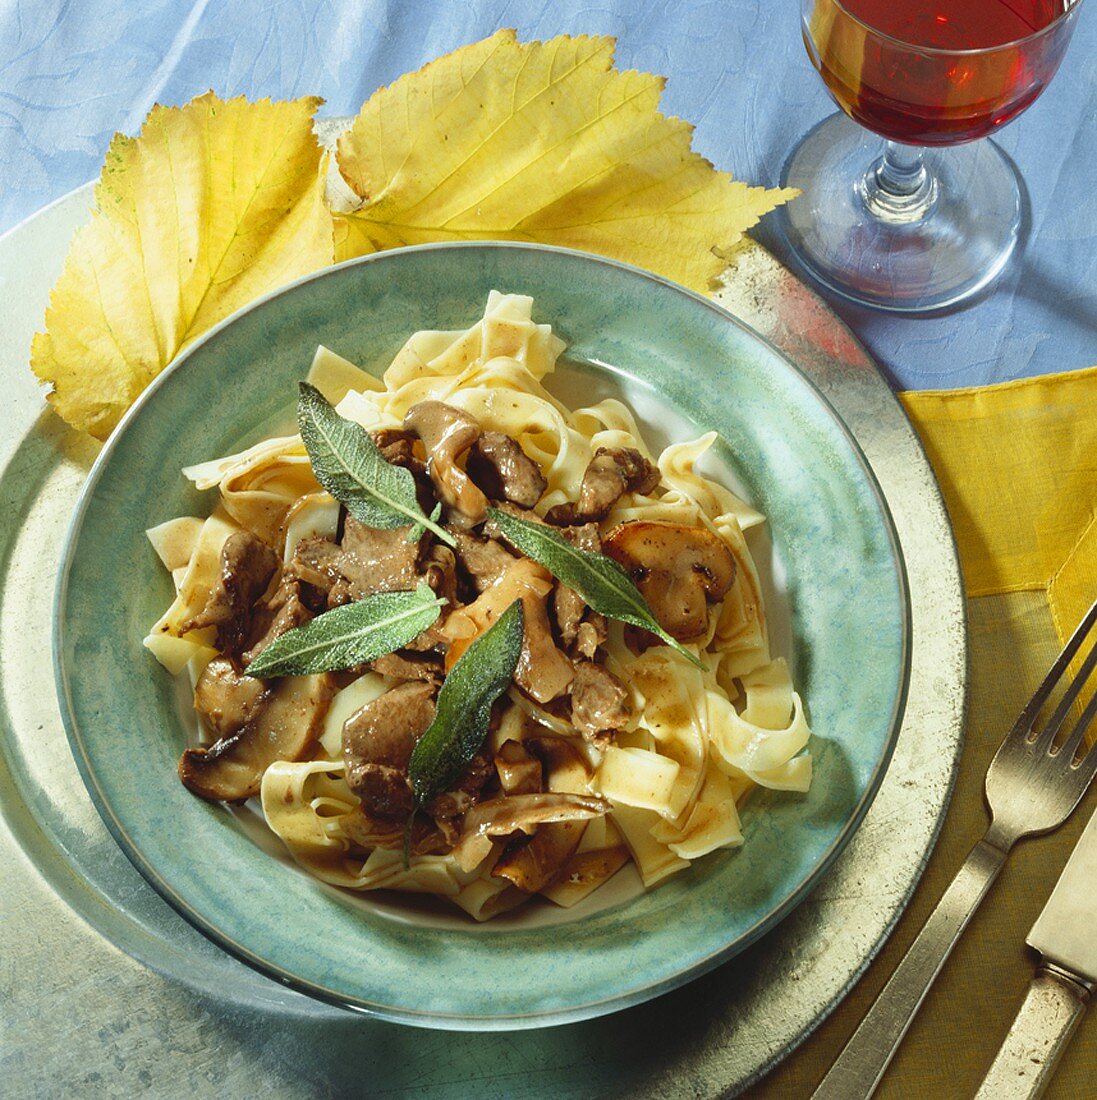 Sliced venison with mushrooms and sage on ribbon pasta